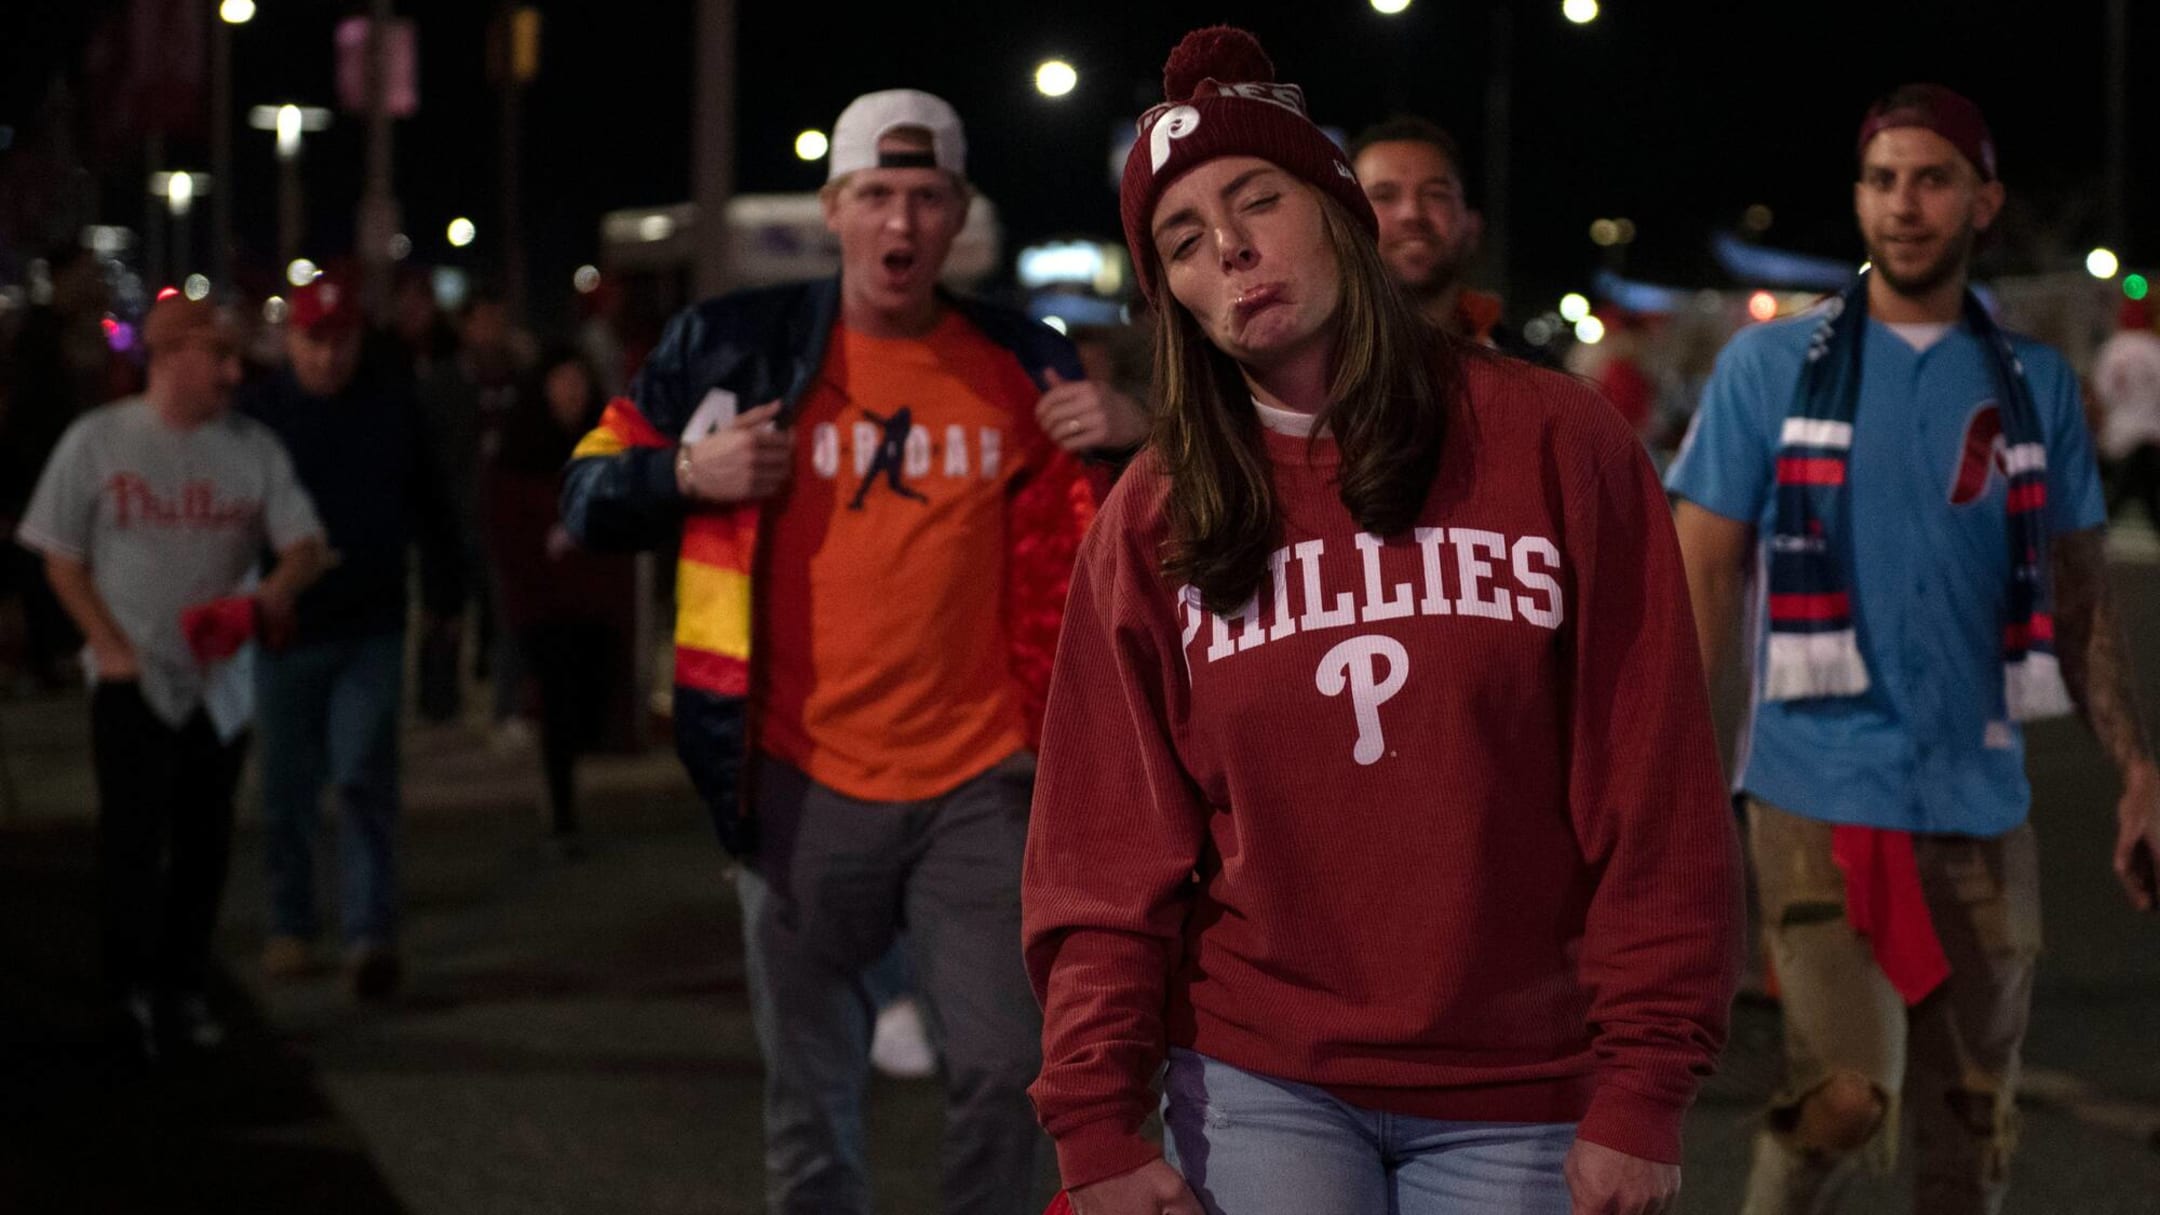 Phillies Fans Went Hungry Thanks To An Unfortunate Tweet